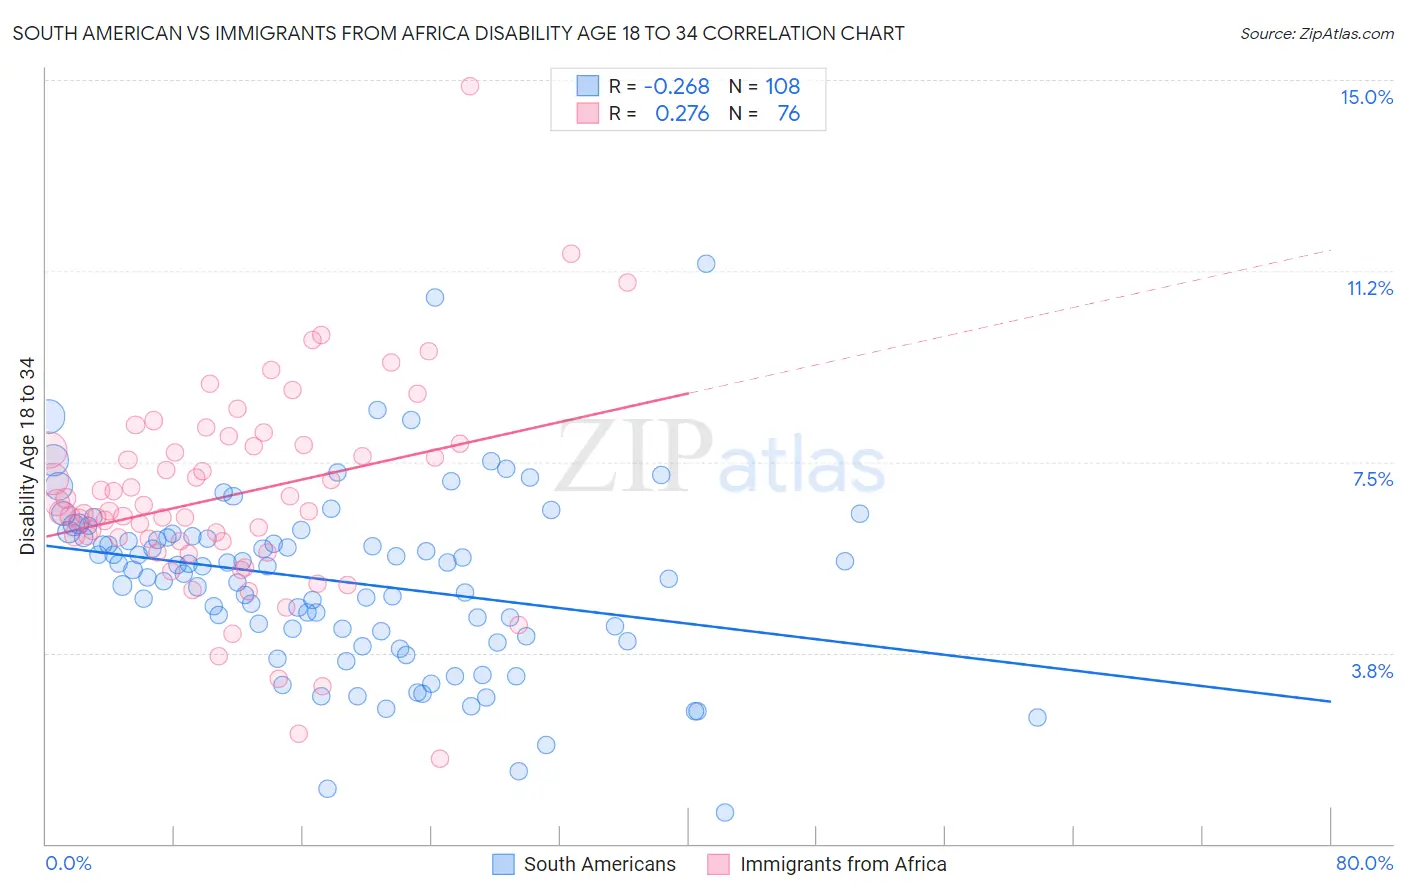 South American vs Immigrants from Africa Disability Age 18 to 34